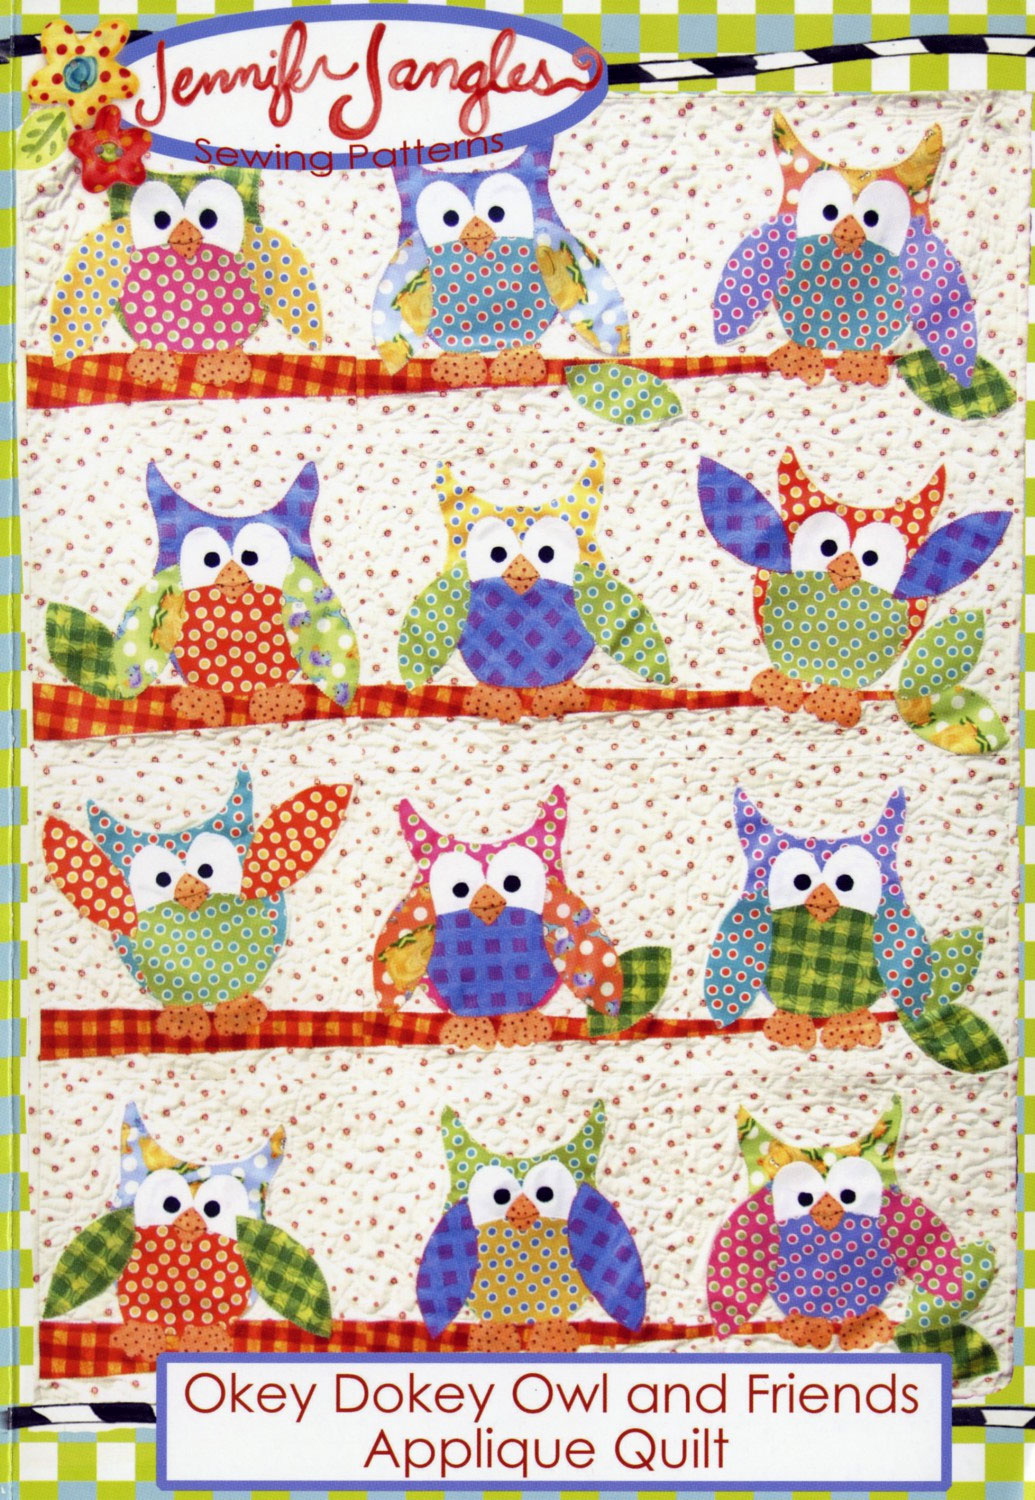 Okey-Dokey-Owl-and-Friends-applique-quilt-sewing-pattern-Jennifer-Jangles-front